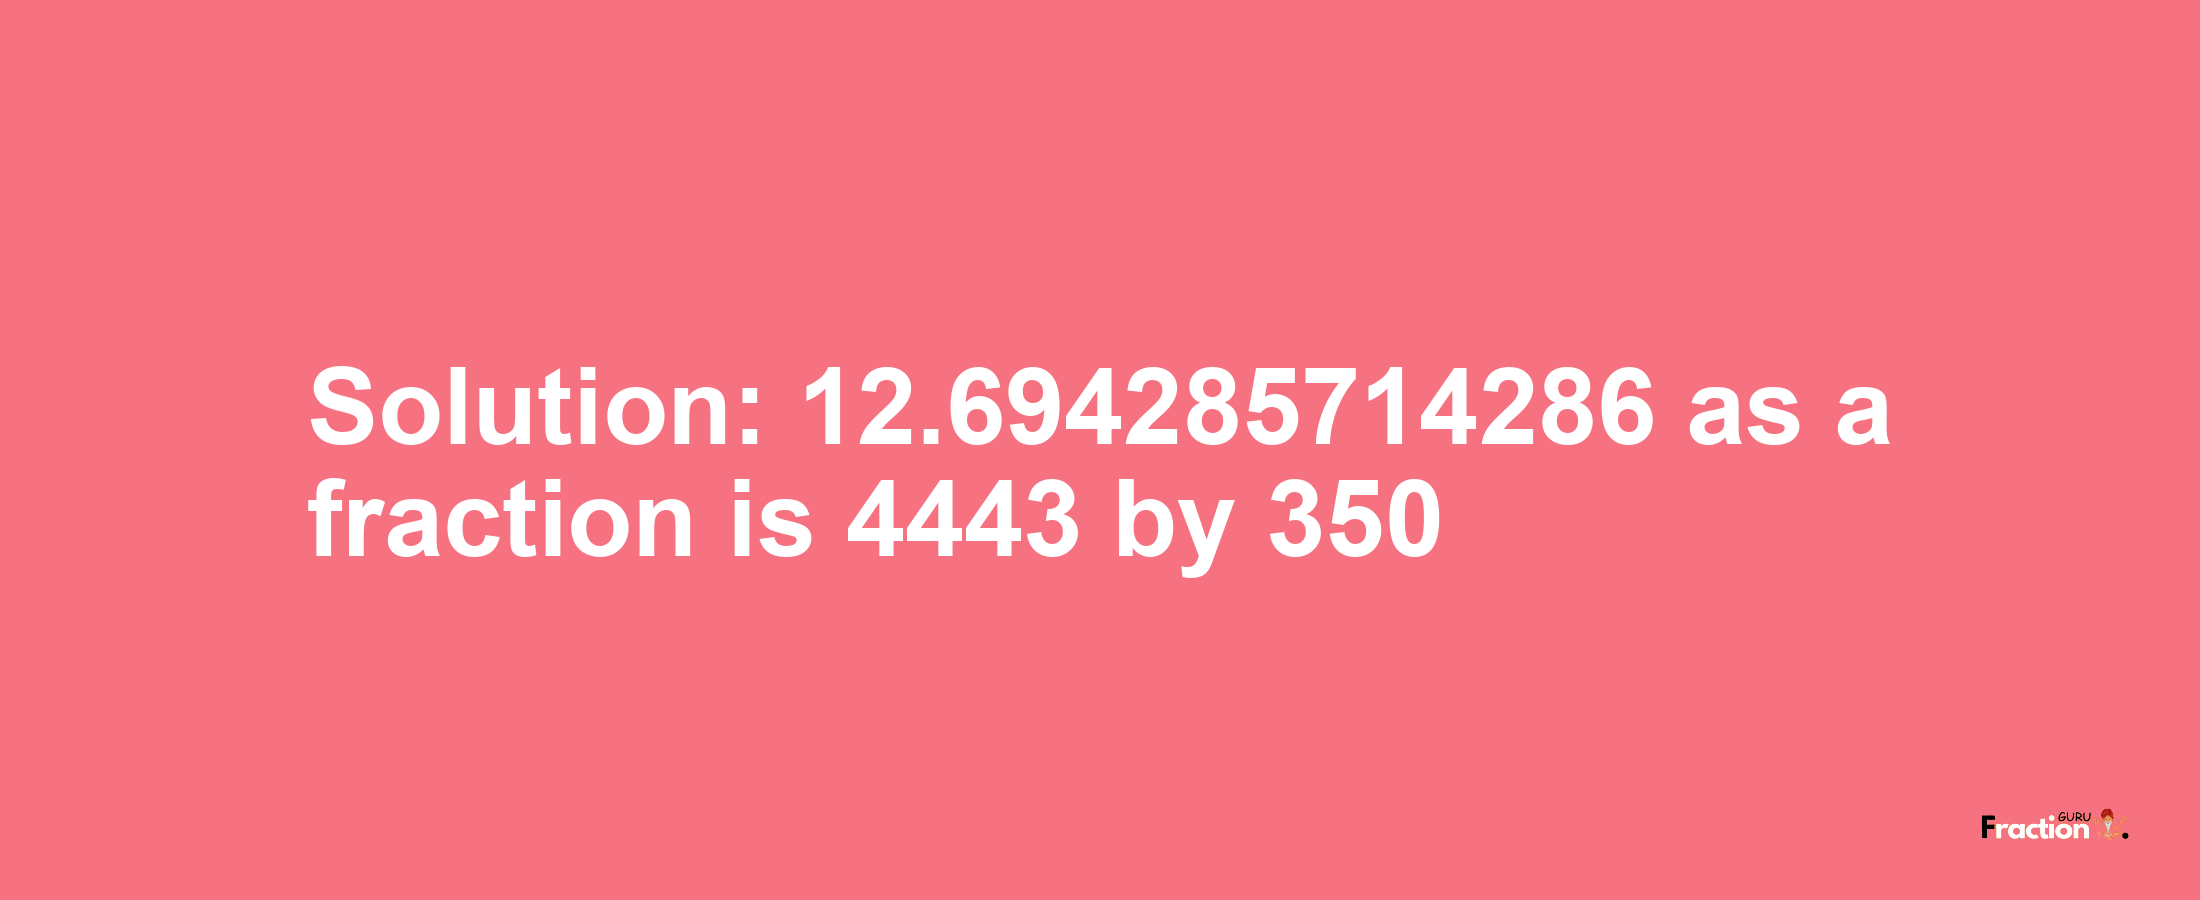 Solution:12.694285714286 as a fraction is 4443/350